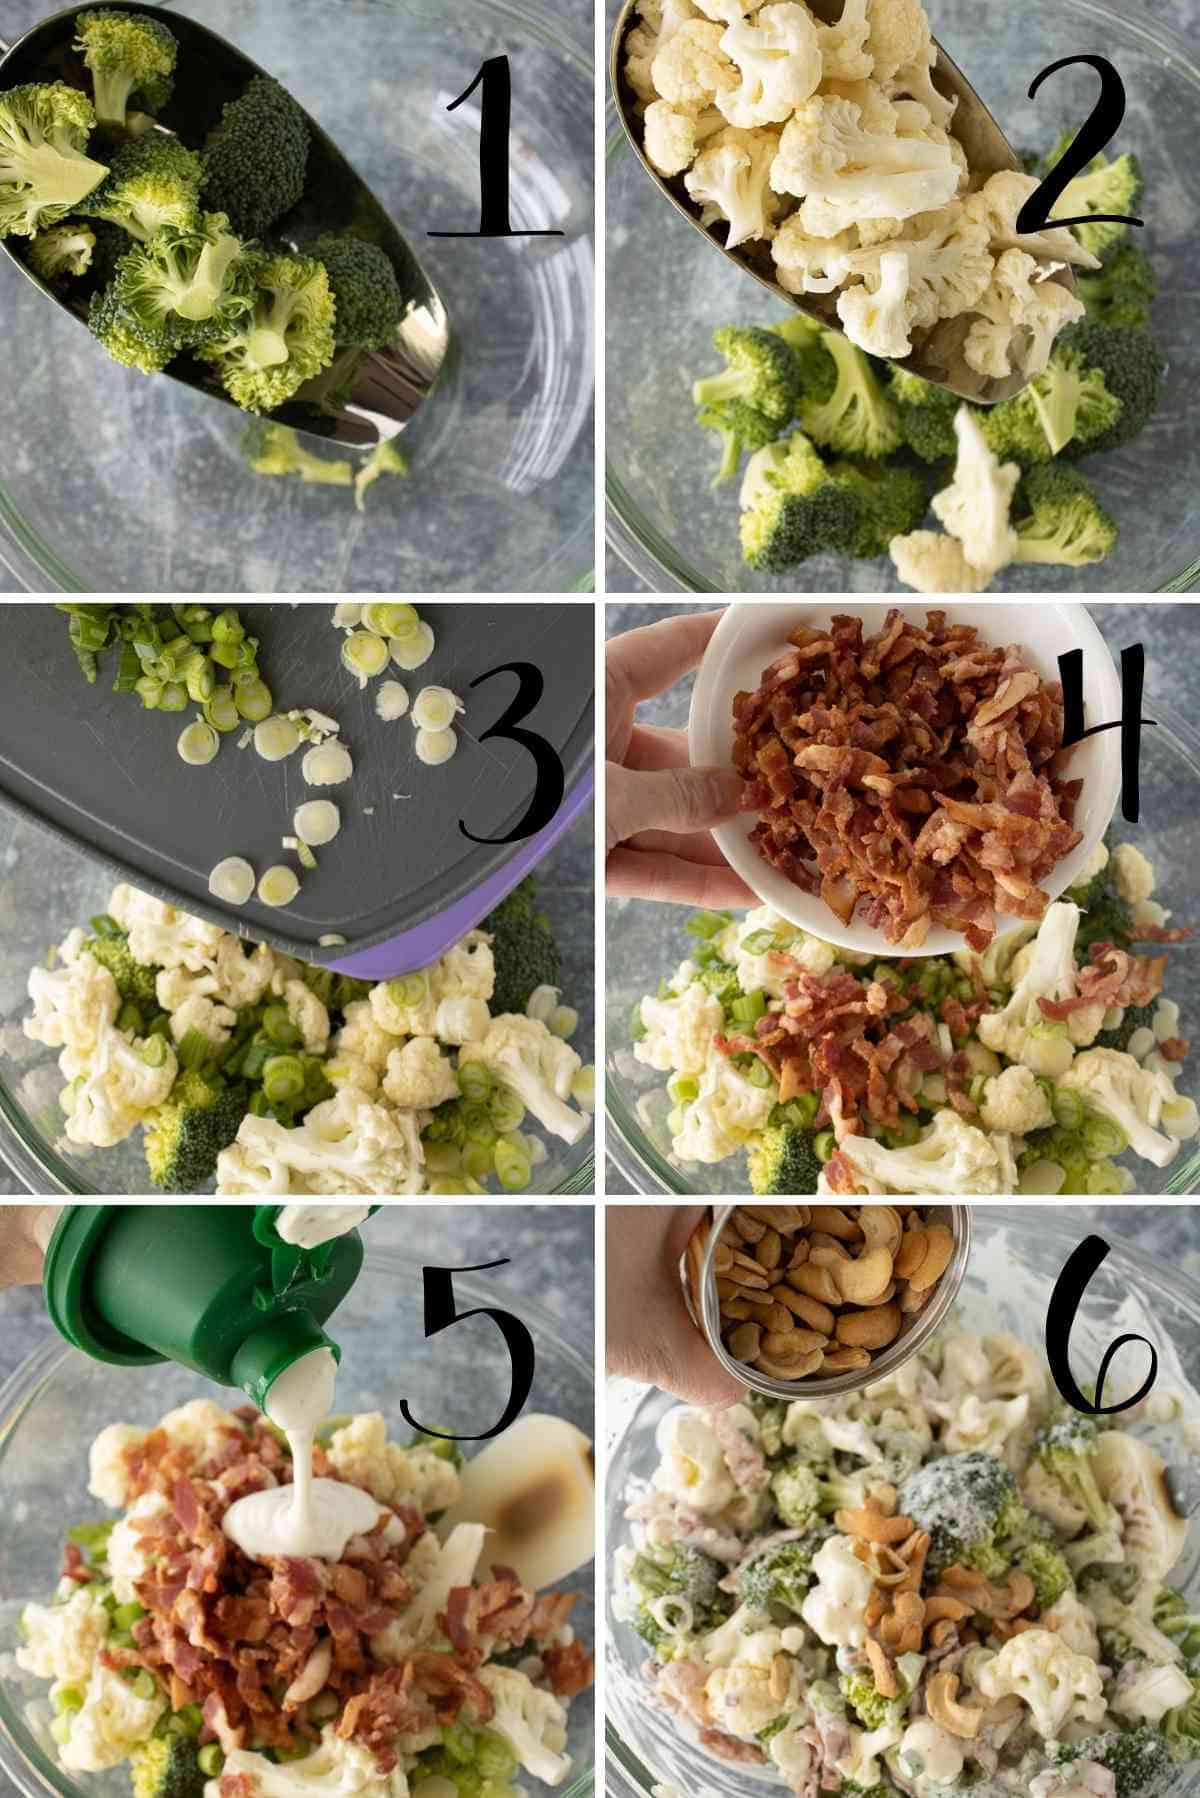 Steps to mix this salad.